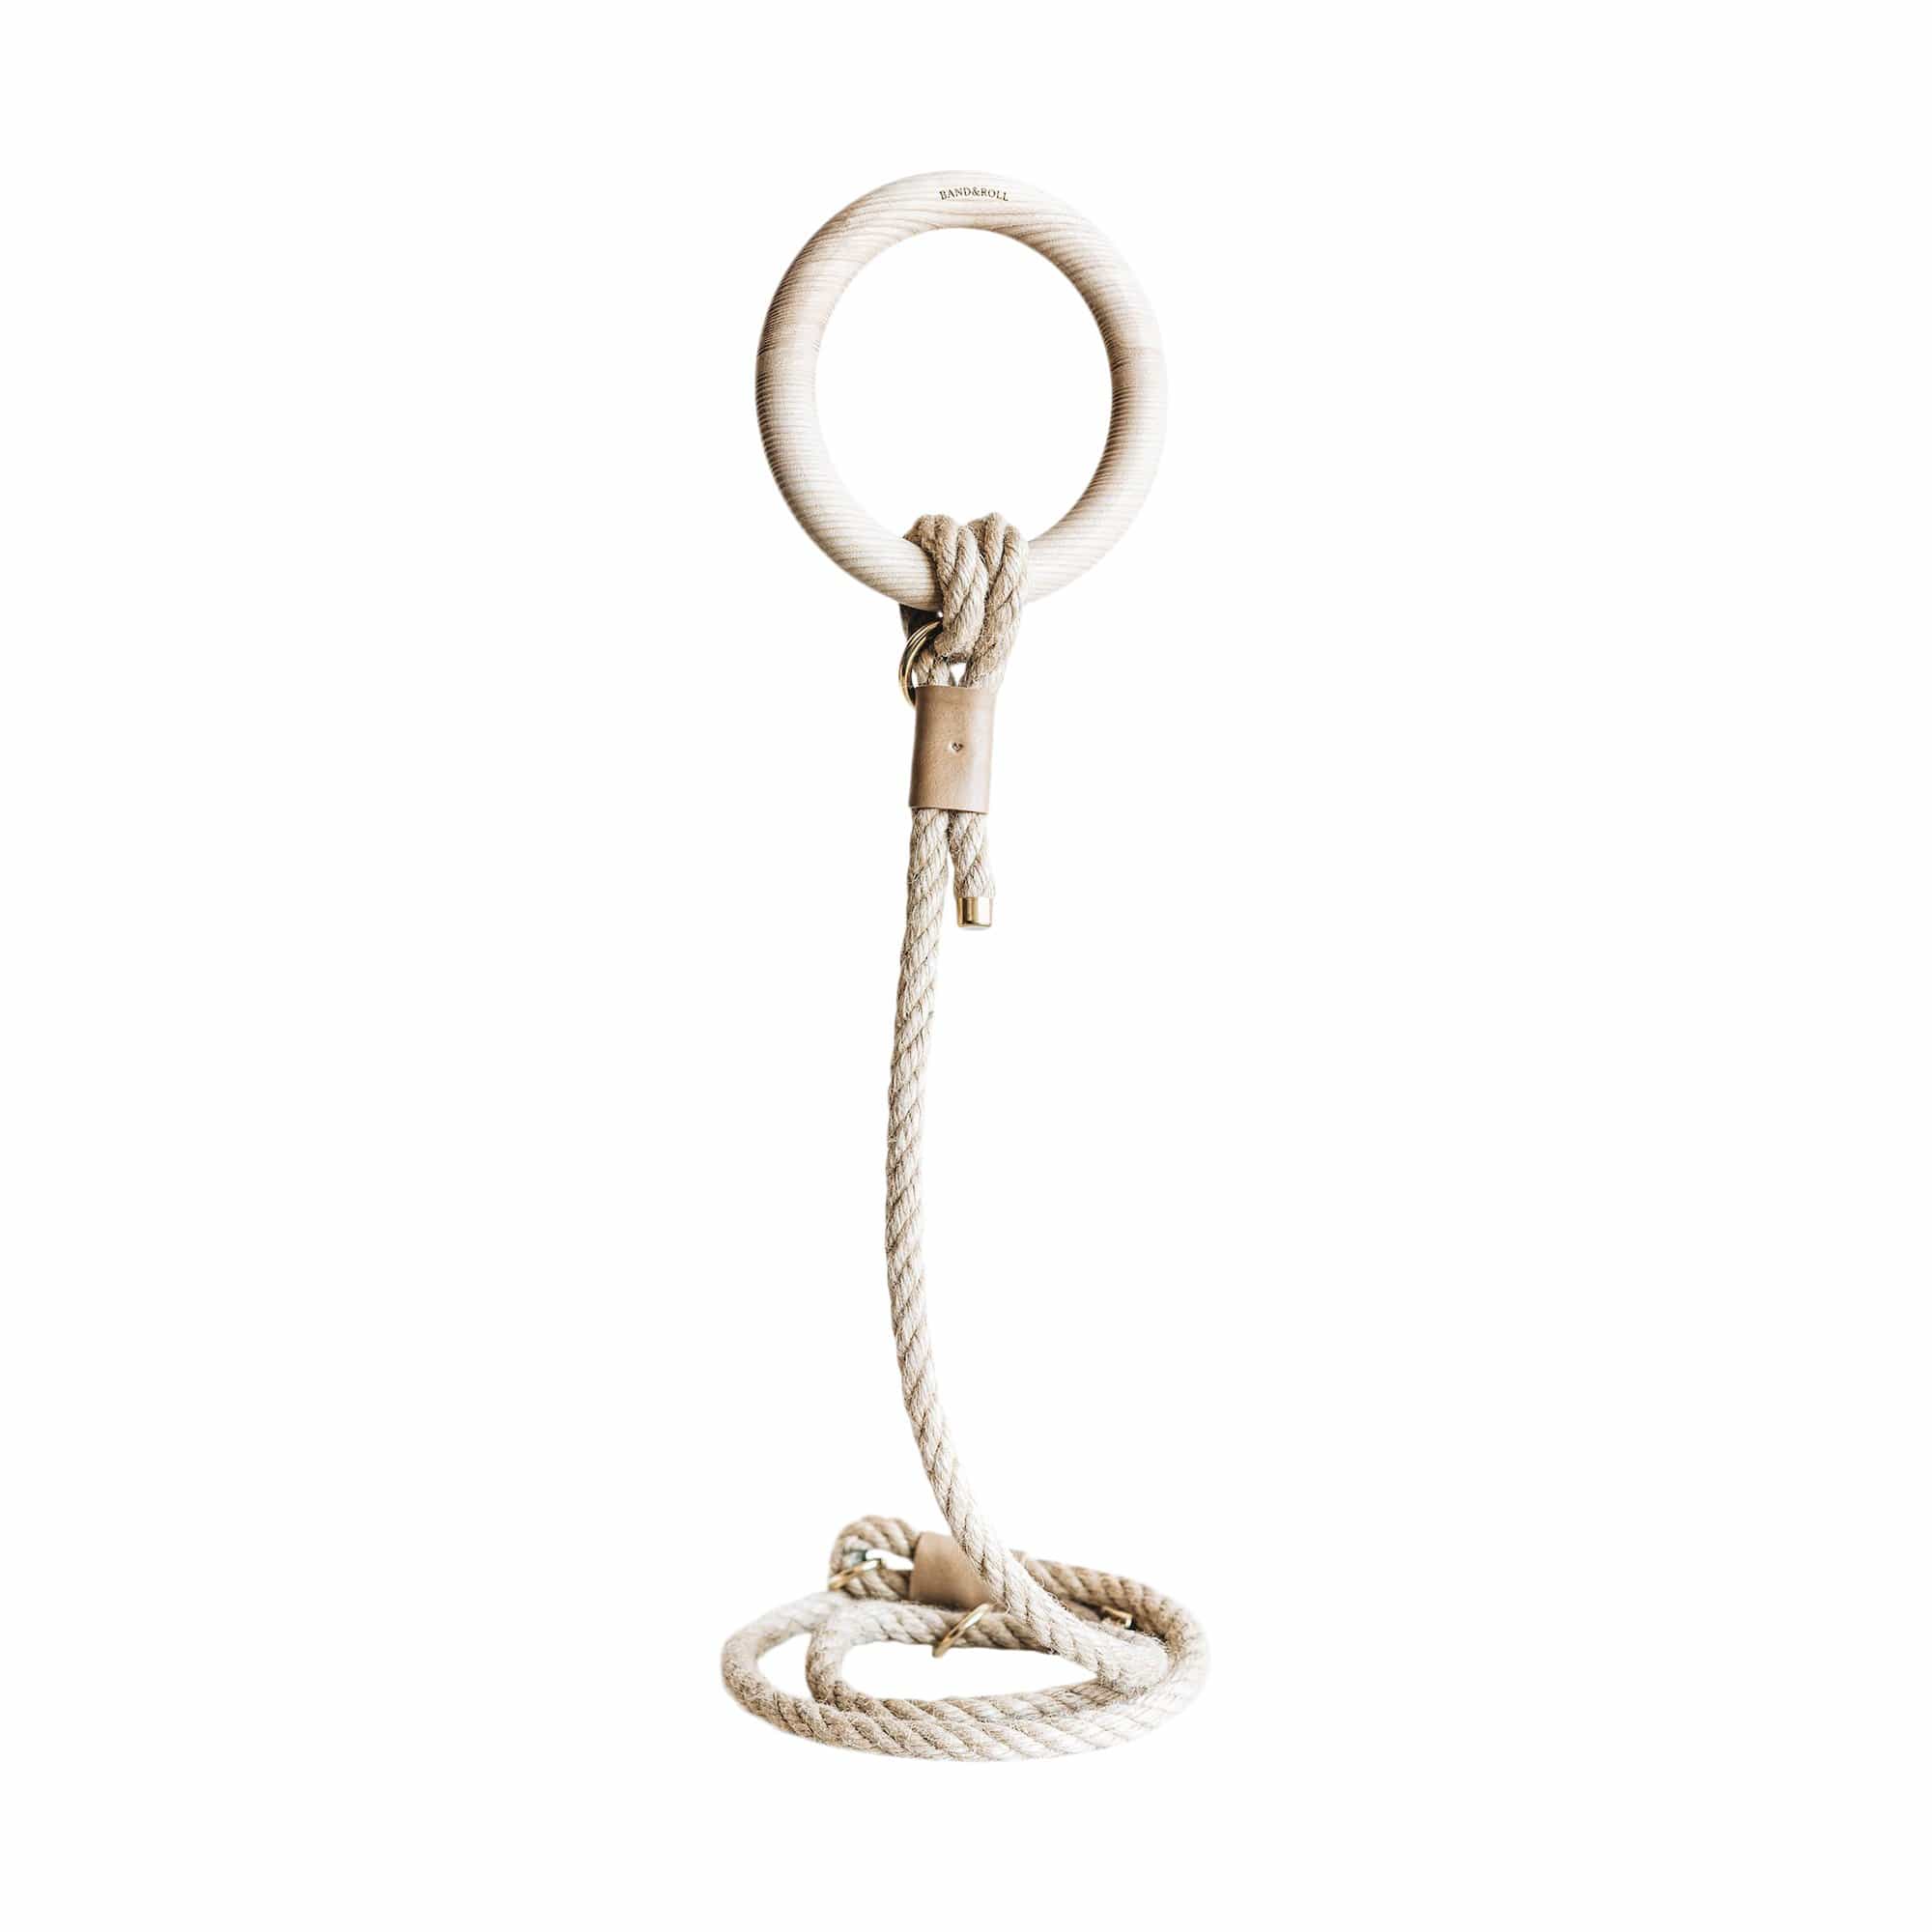 Ash Rope Leash with Wooden Ring Handle